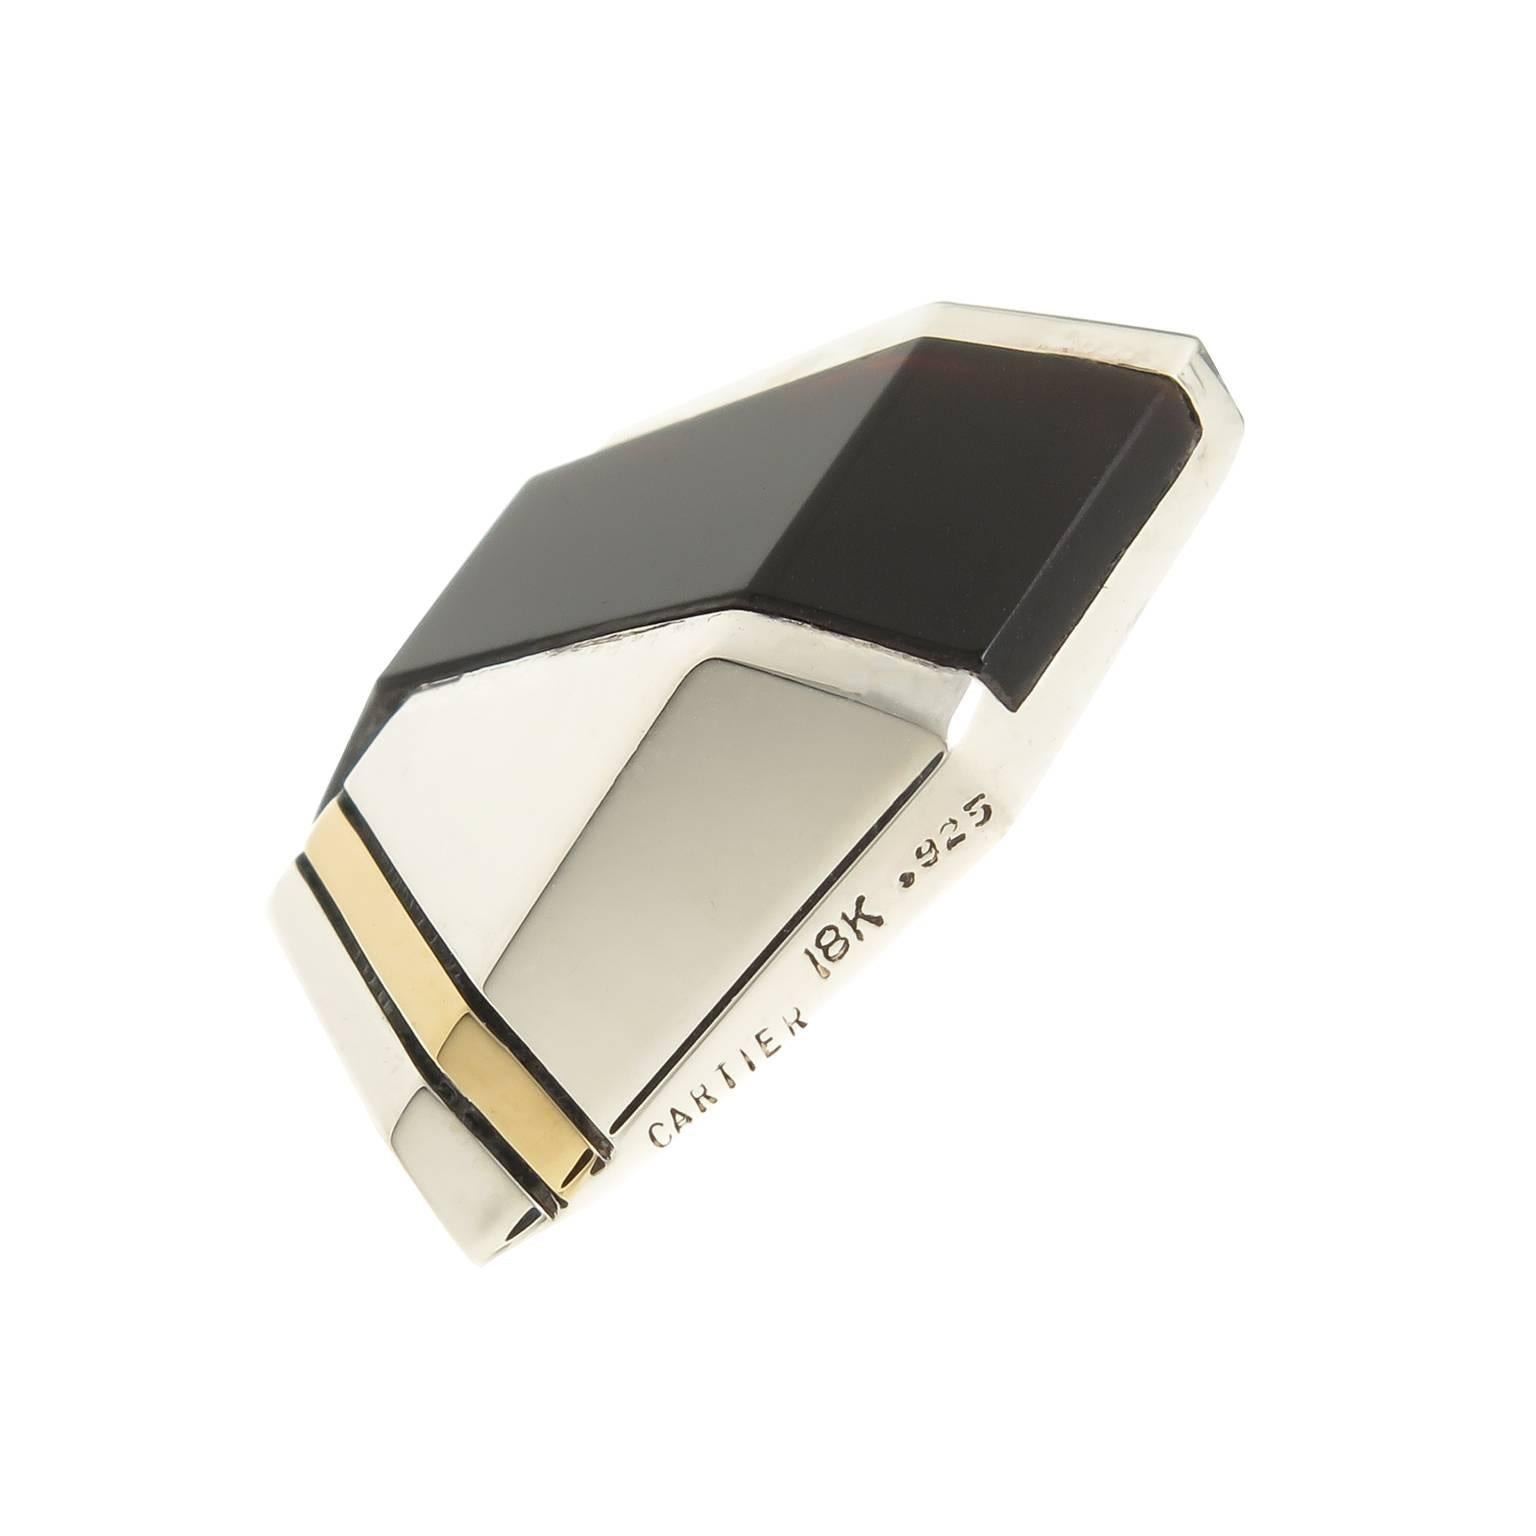 Circa 1980 Cartier 18K yellow Gold, Sterling silver and Onyx Earrings, measuring 1 1/4 inch in length and 7/8 inch wide. Having a post back, the earrings are in excellent condition and come in a Suede Cartier Pouch.